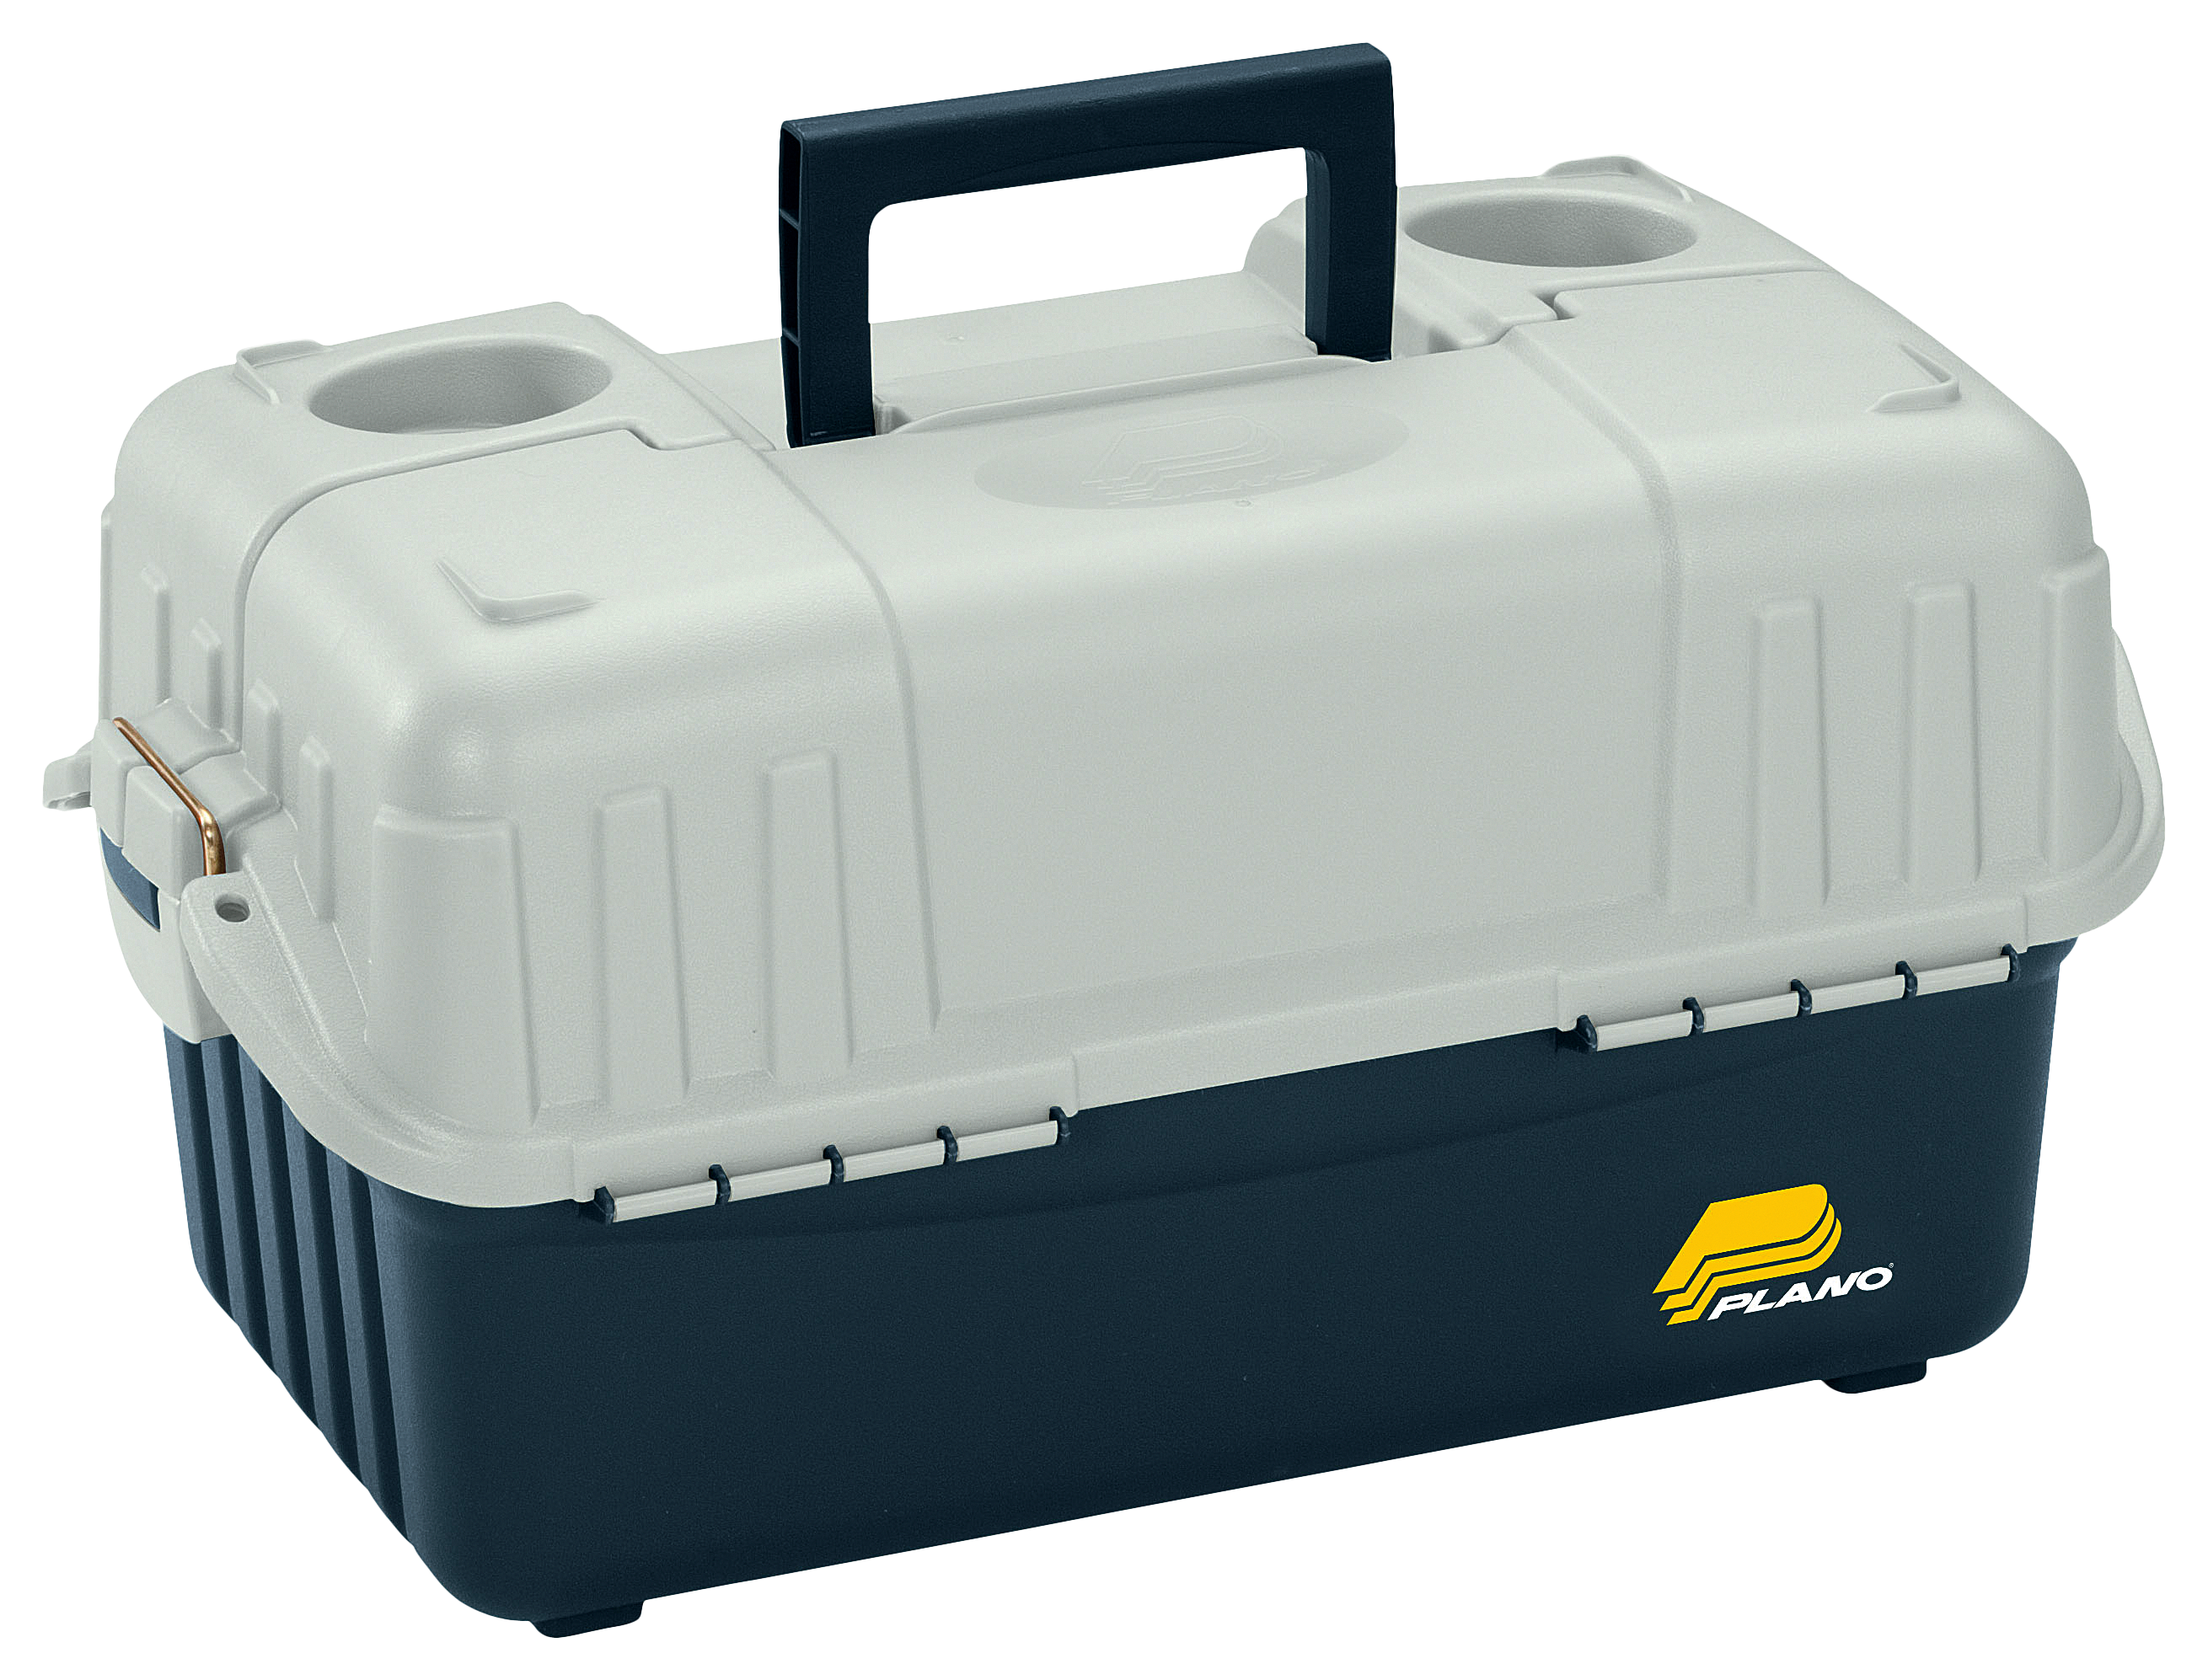 Plano Magnum HipRoof Tray Tackle Box - 8616